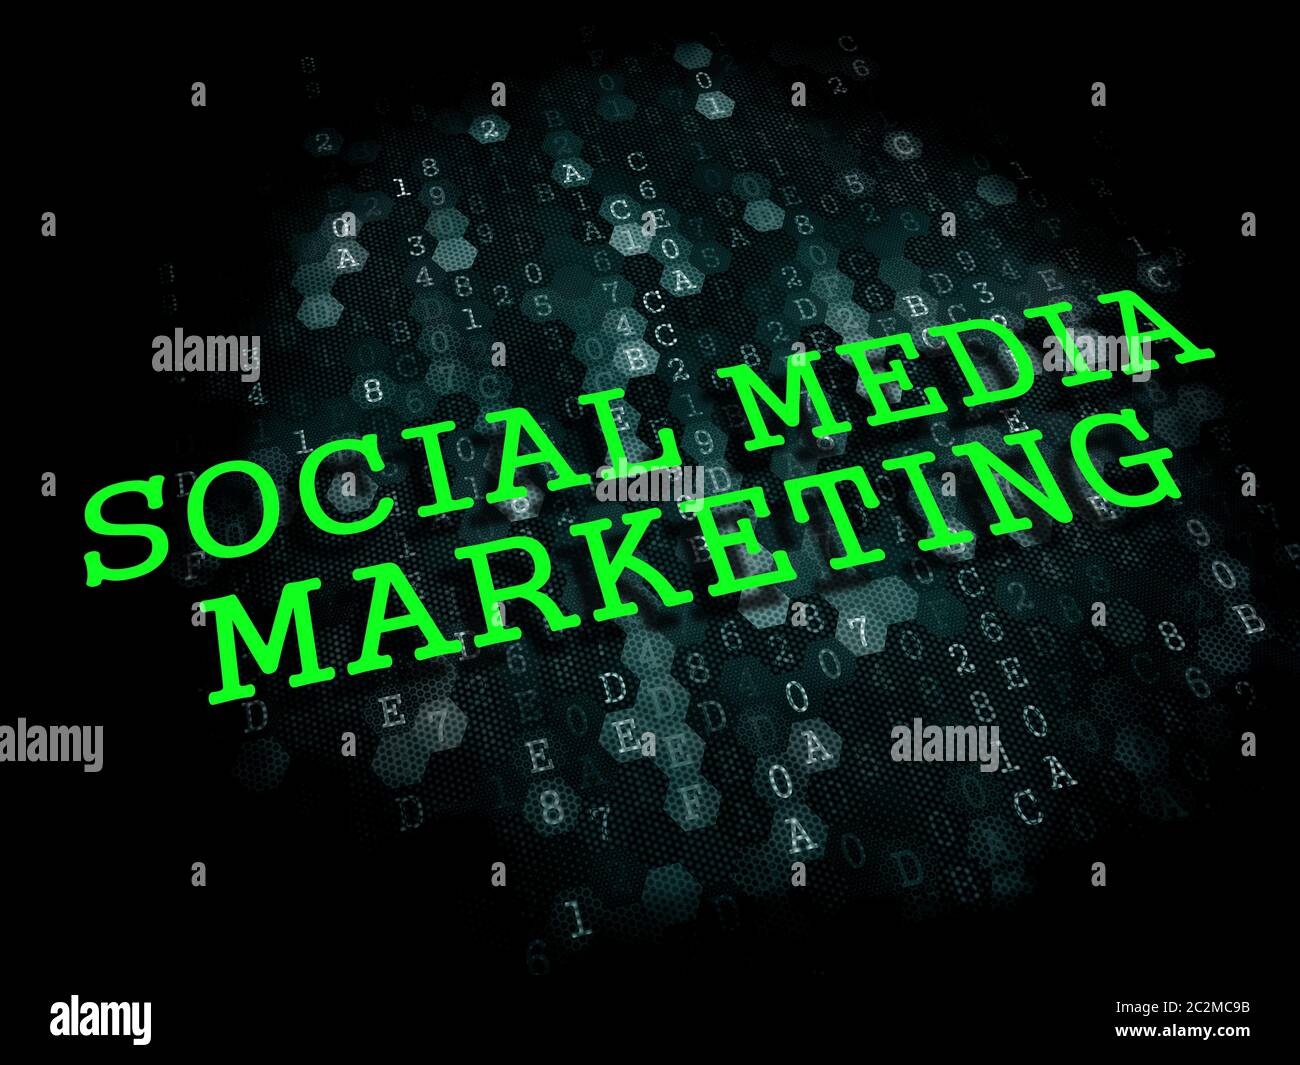 Social Media Marketing - Business Concept. The Words in Light Green Color  on Dark Digital Background Stock Photo - Alamy